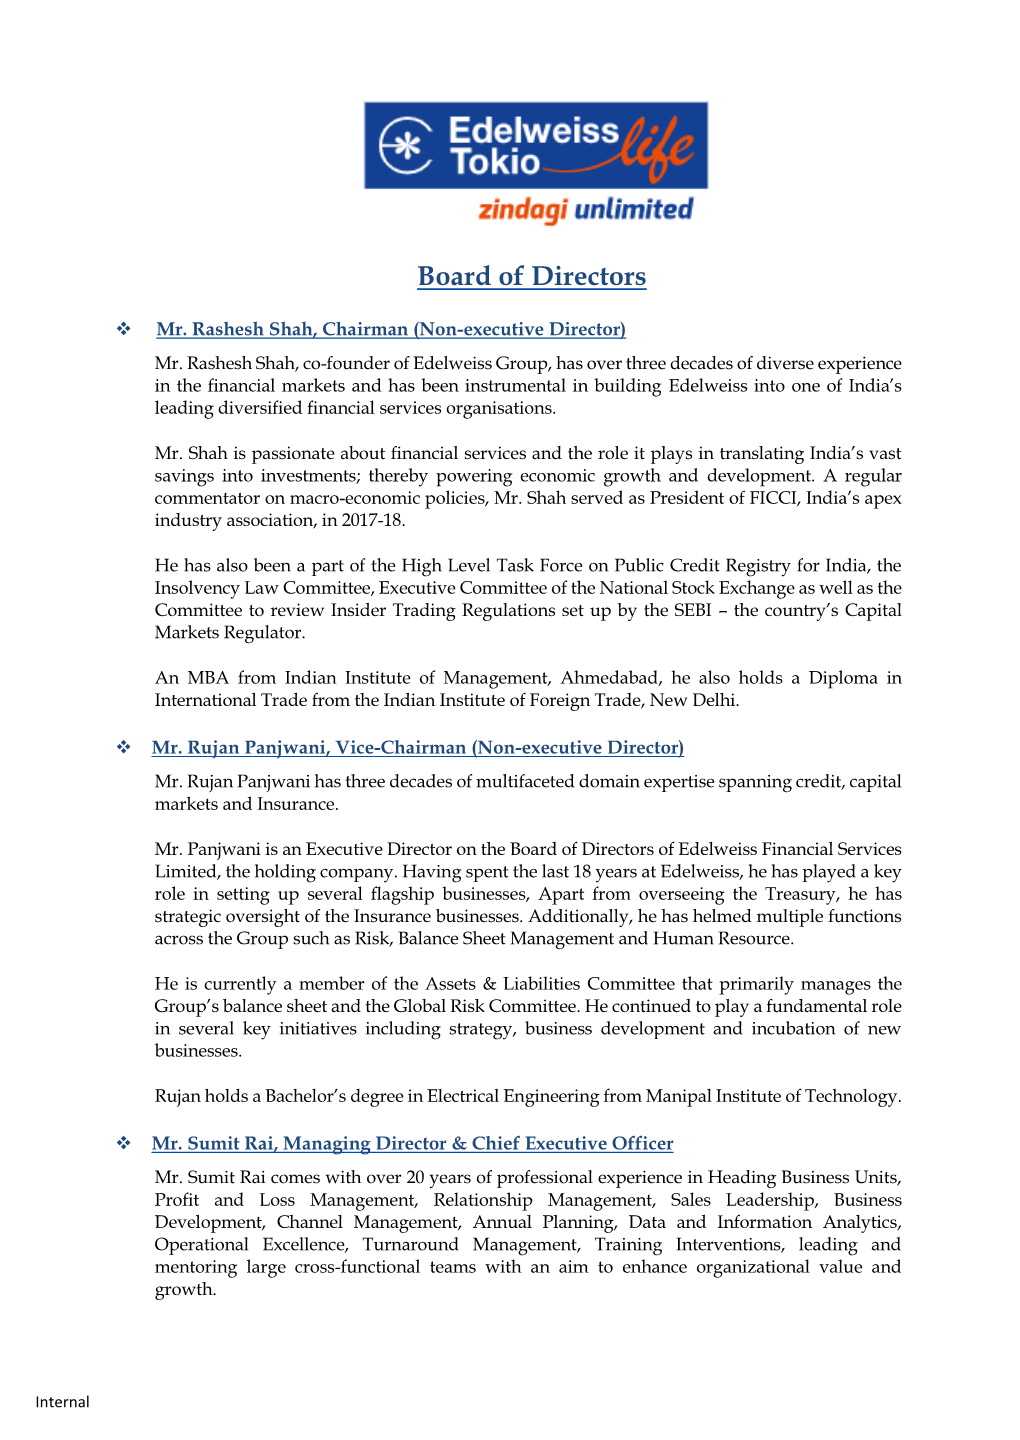 Board of Directors, Committees and Resignations